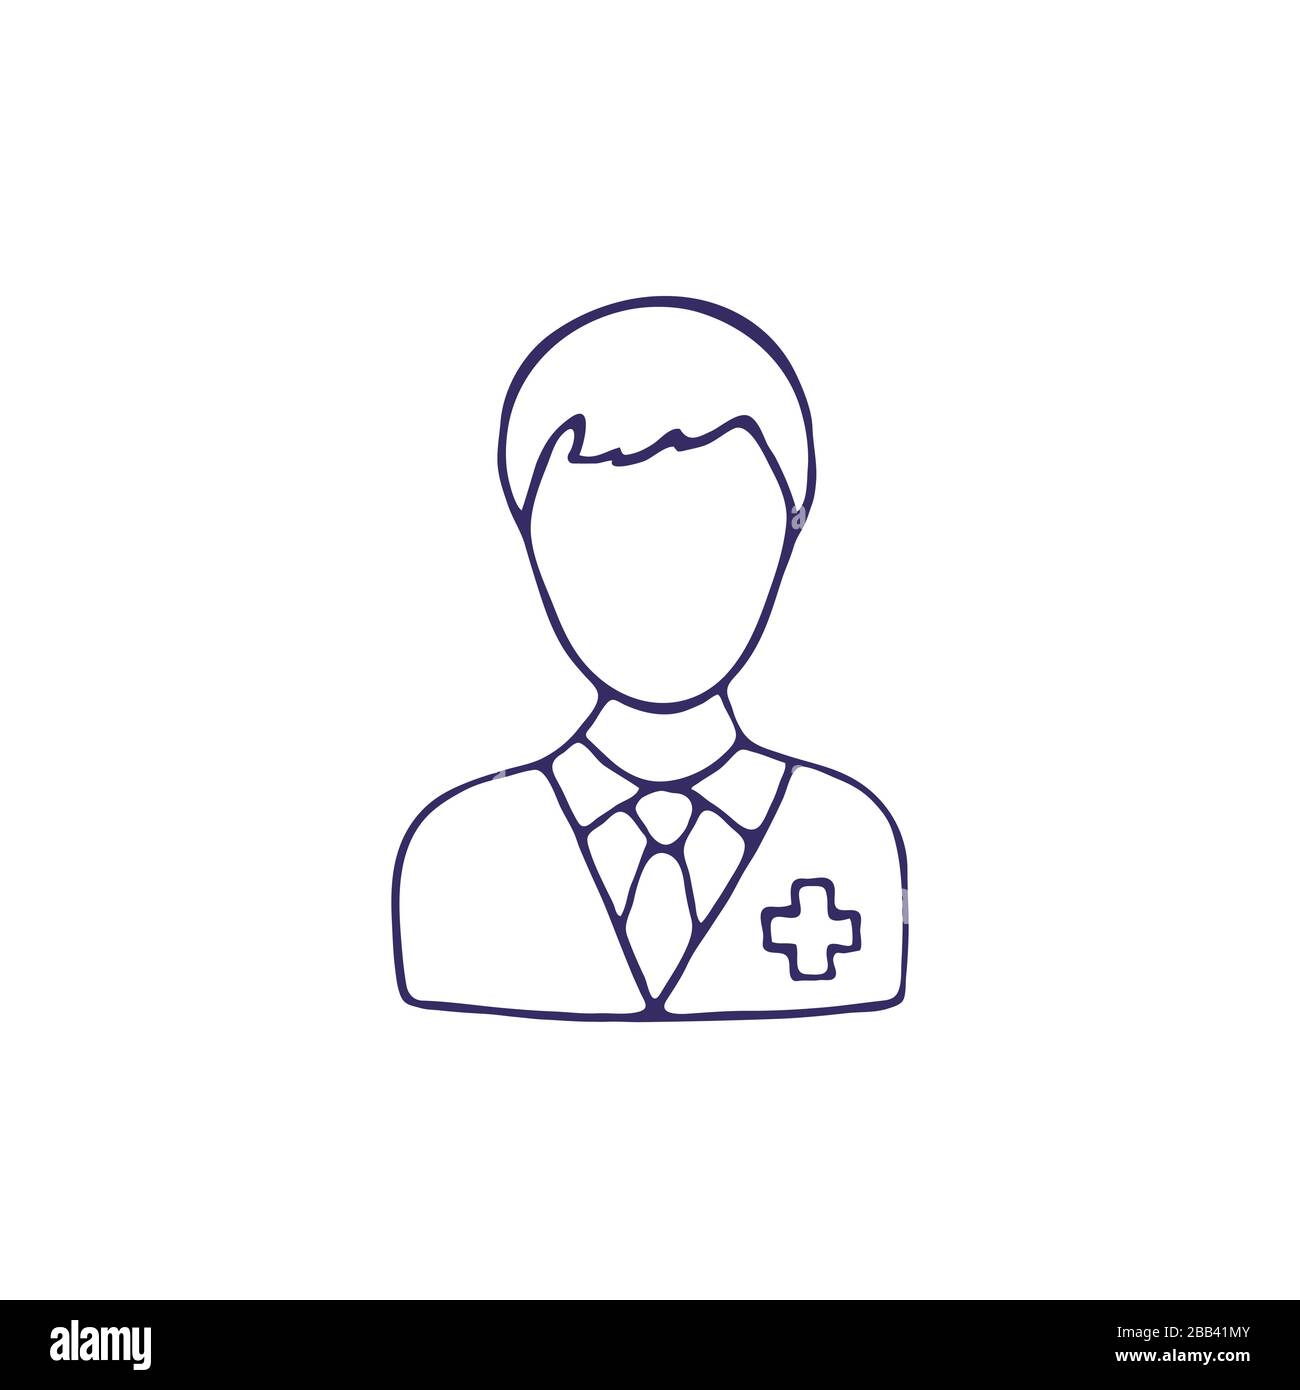 Black hand drawn doctor face icon on white background. Medical symbol. Doodle vector illustration. Stock Vector